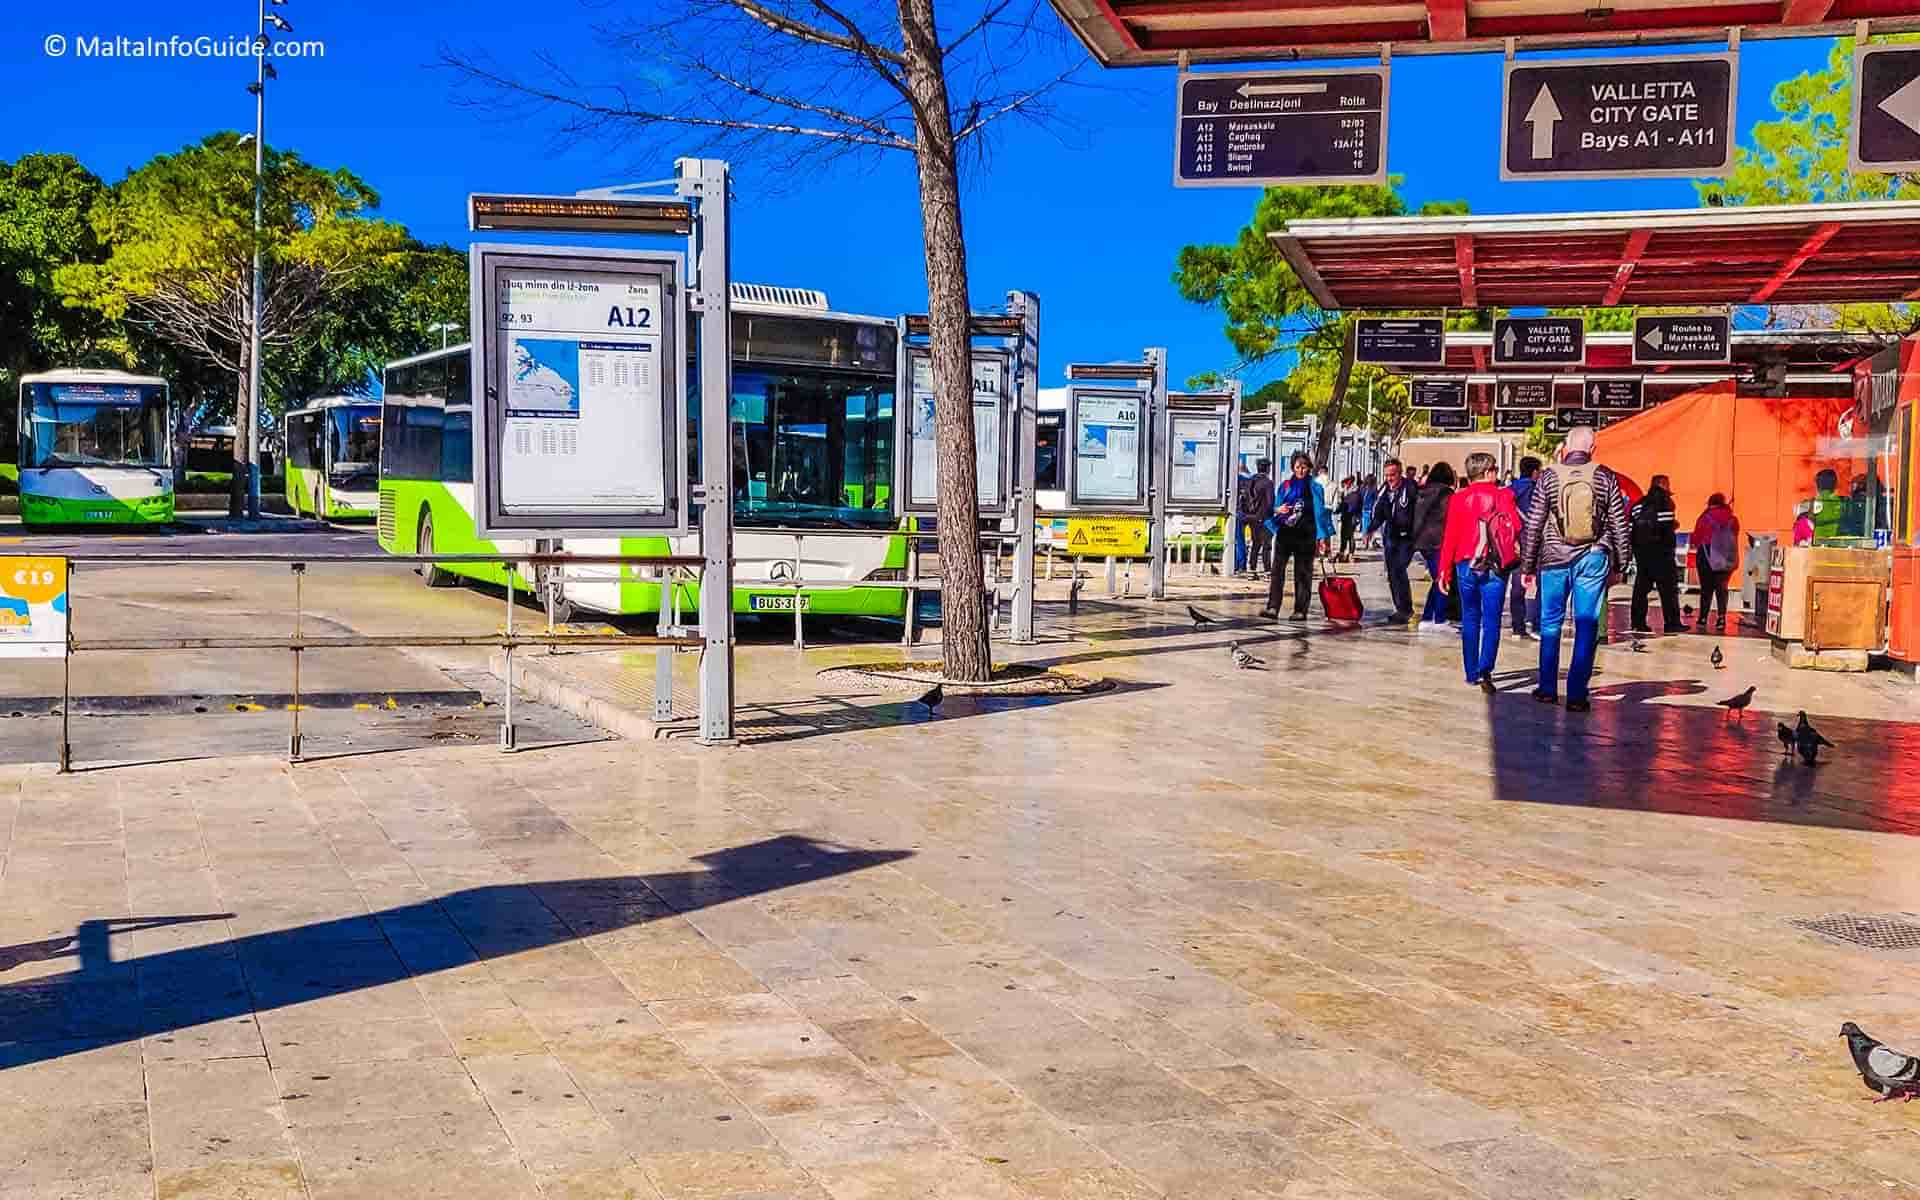 Buses parked at Valletta bus terminus.